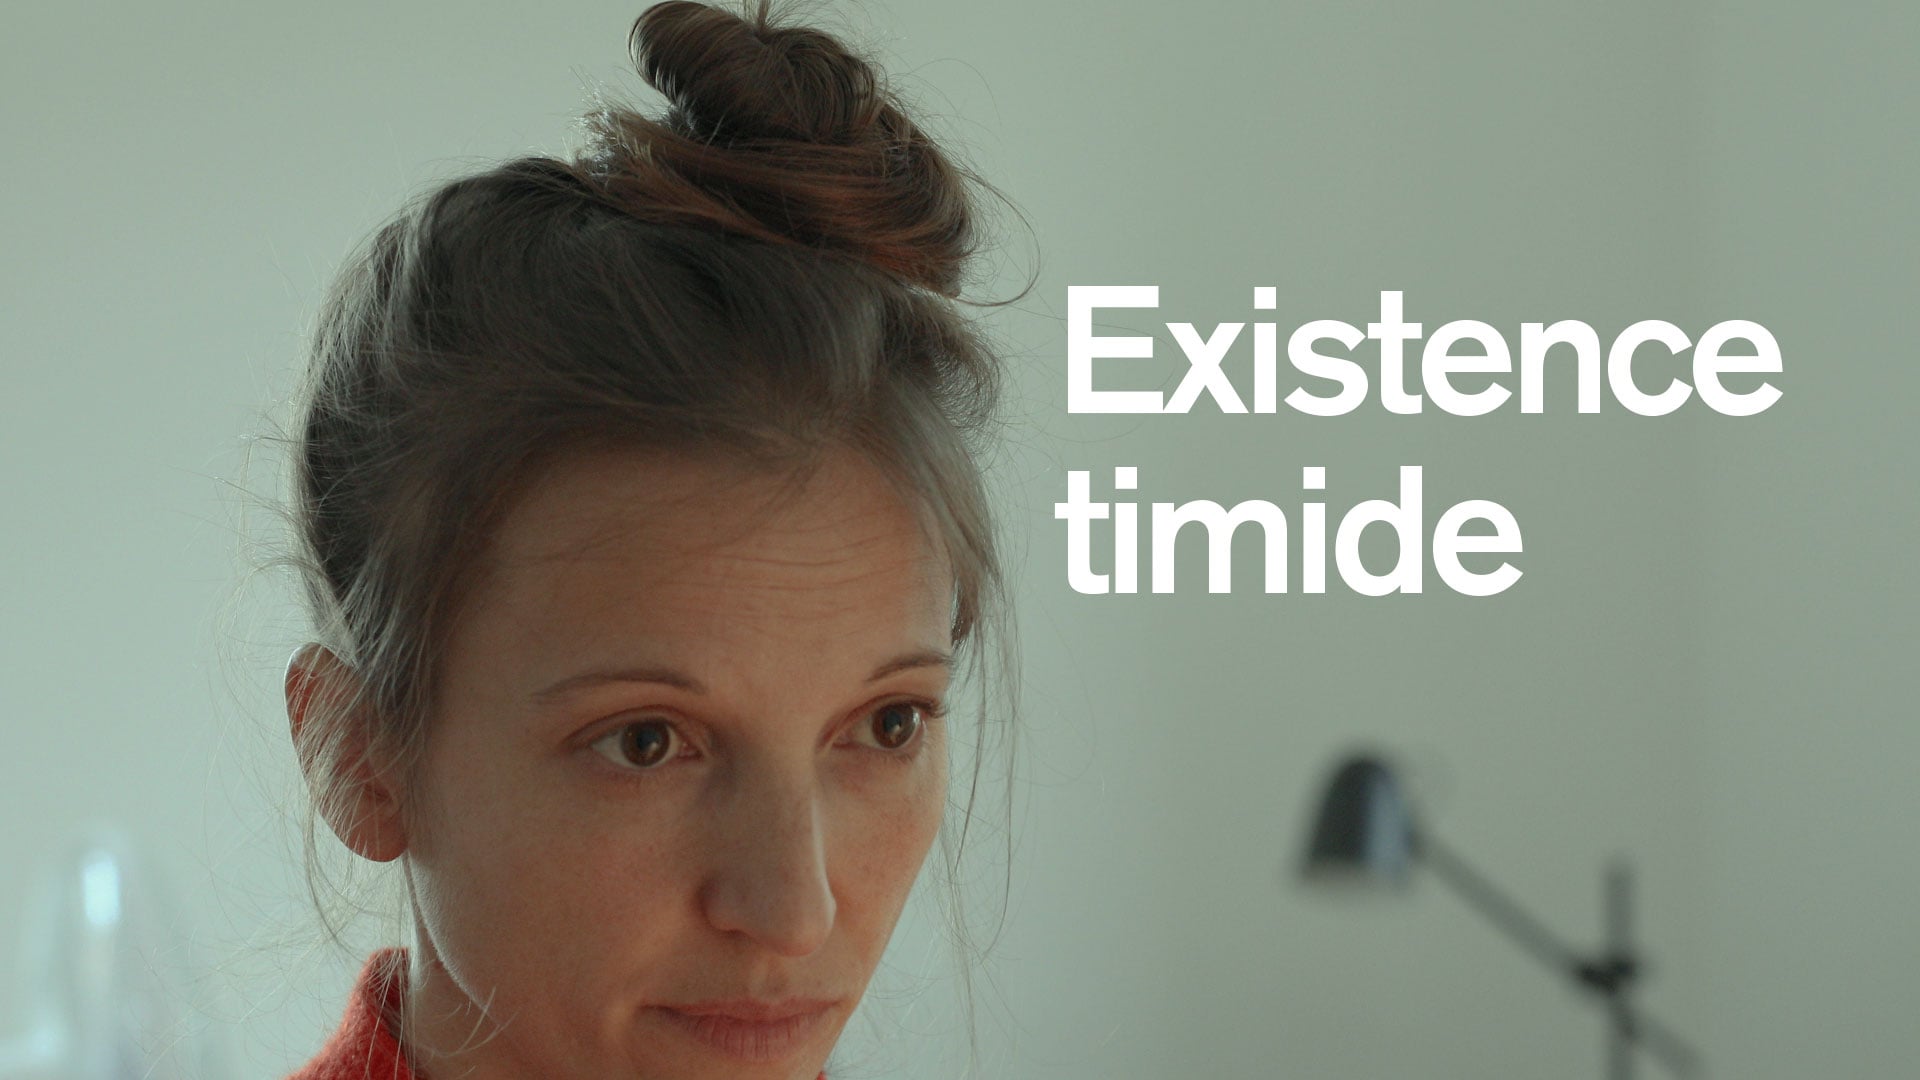 Existence timide